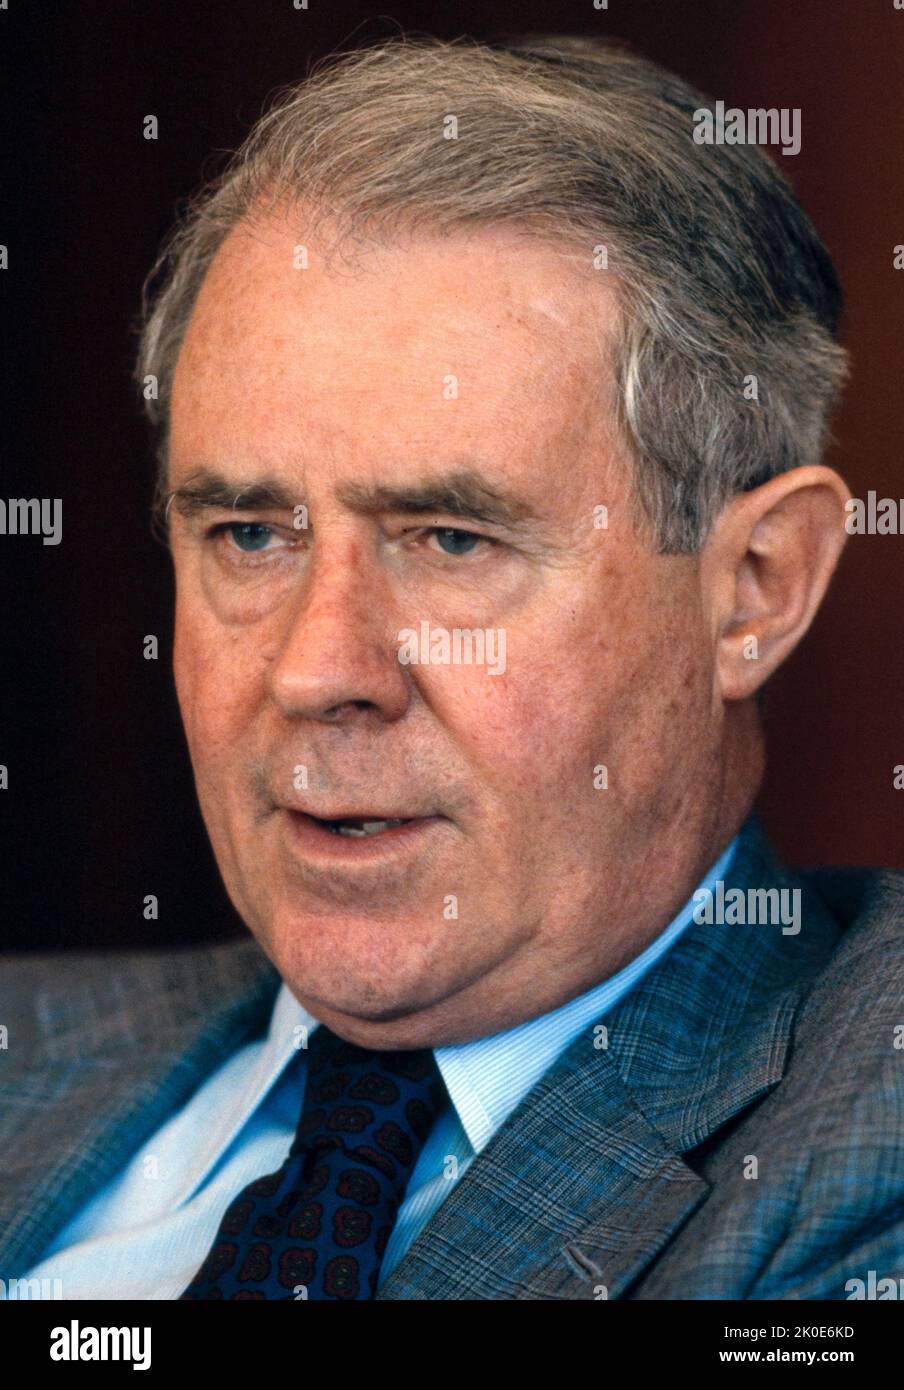 Cyrus Roberts Vance Sr. (March 27, 1917 - January 12, 2002) was an American lawyer and United States Secretary of State under President Jimmy Carter from 1977 to 1980. Stock Photo